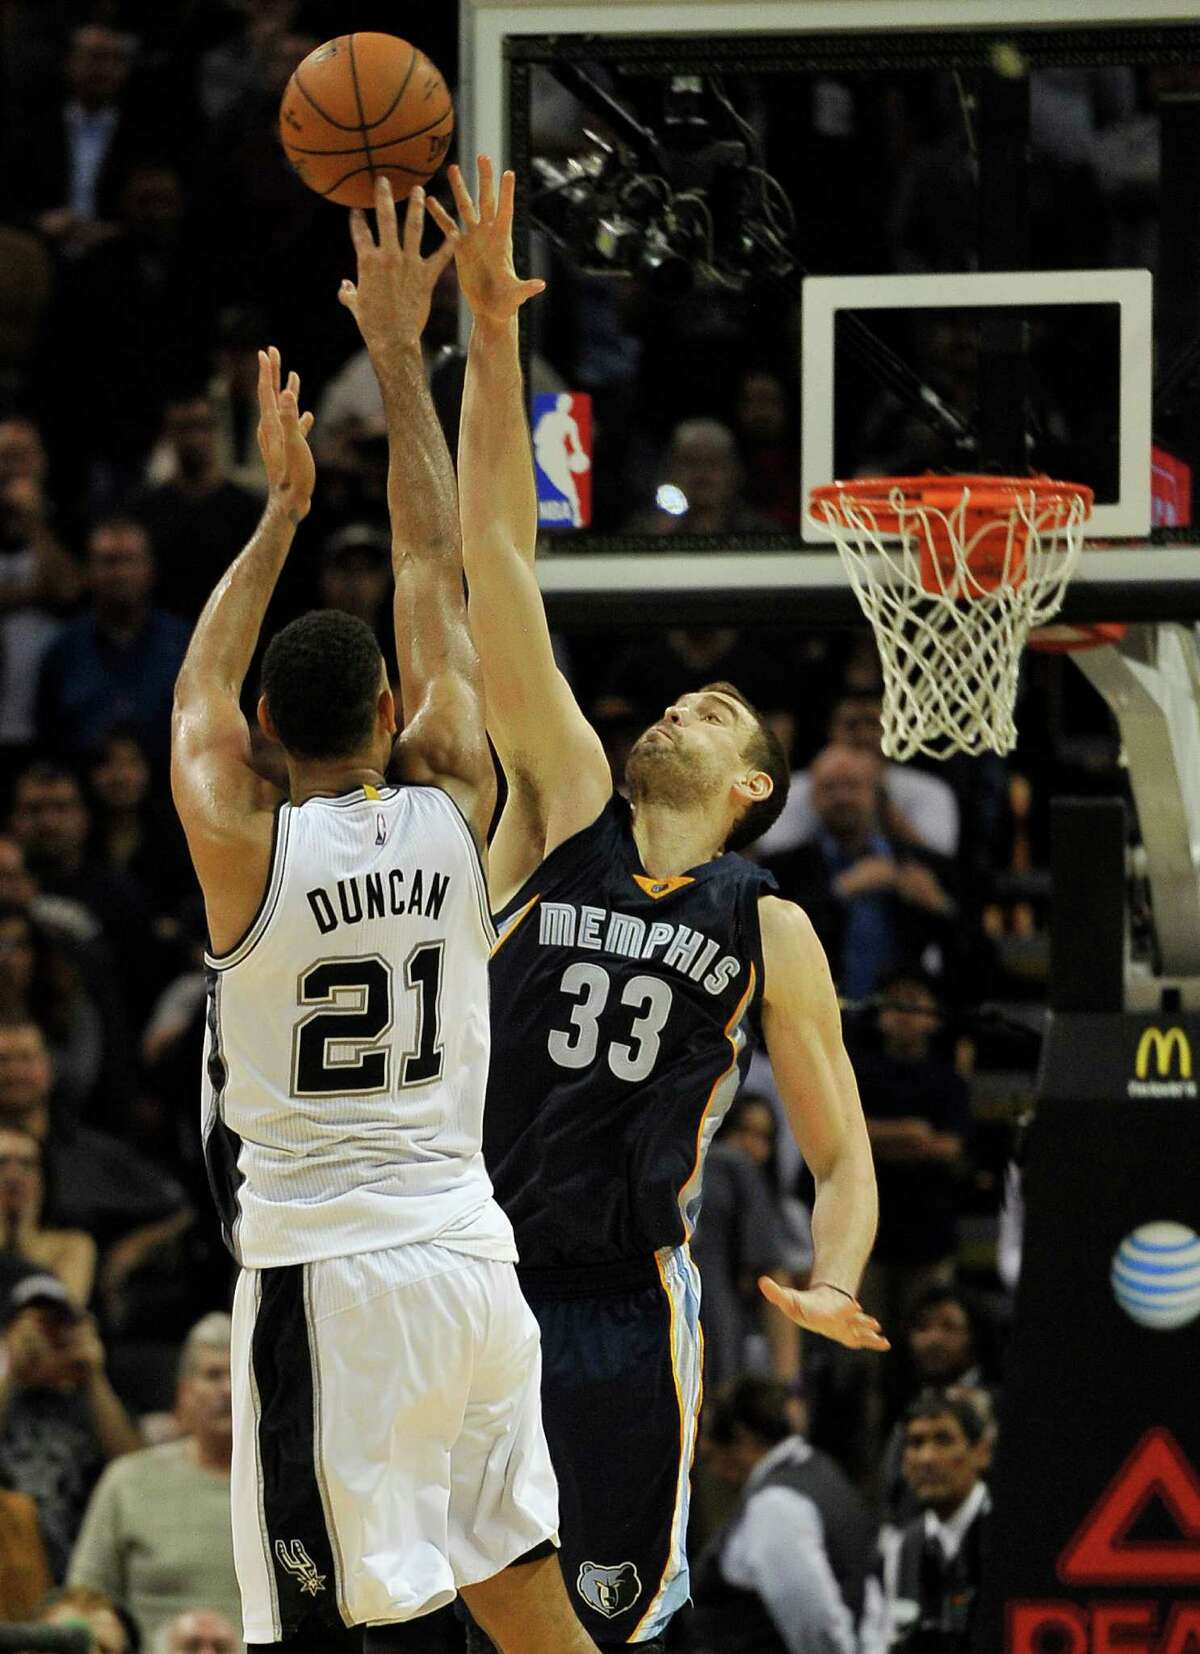 Spurs forward Tim Duncan sinks a basket over Memphis Grizzlies center Marc Gasol in the second overtime period, to send the game into triple overtime on Dec. 17, 2014, in San Antonio.